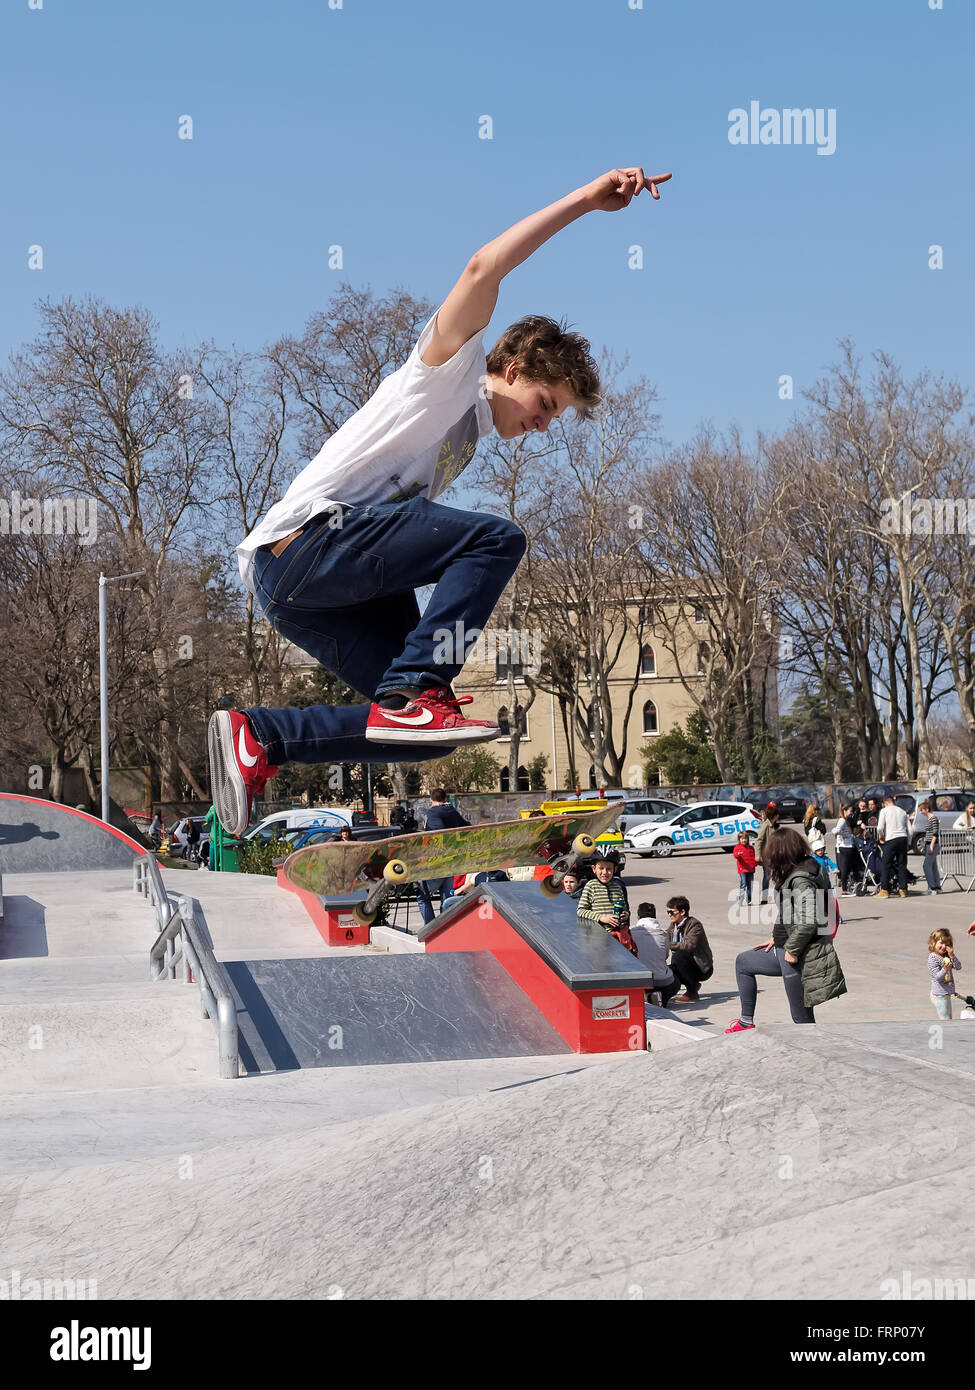 Unidentified skateboarder doing a slide jump during the opening new  Skate-park in Pula, Croatia Stock Photo - Alamy